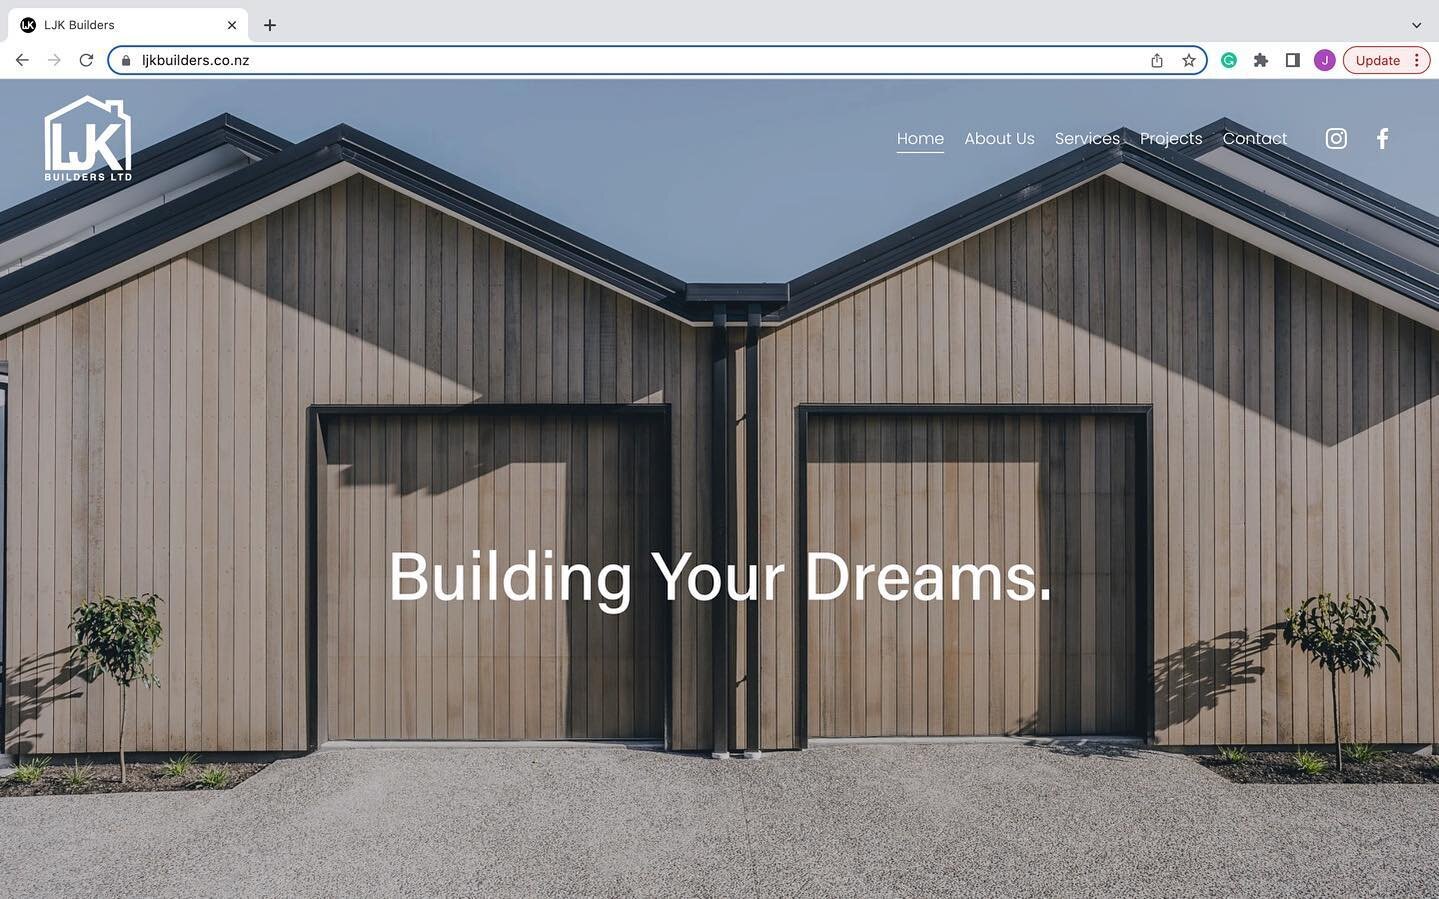 Our website makeover is complete and packed full of information to help you along your dream home journey. Click the link in our bio to check it out! 

www.ljkbuilders.co.nz